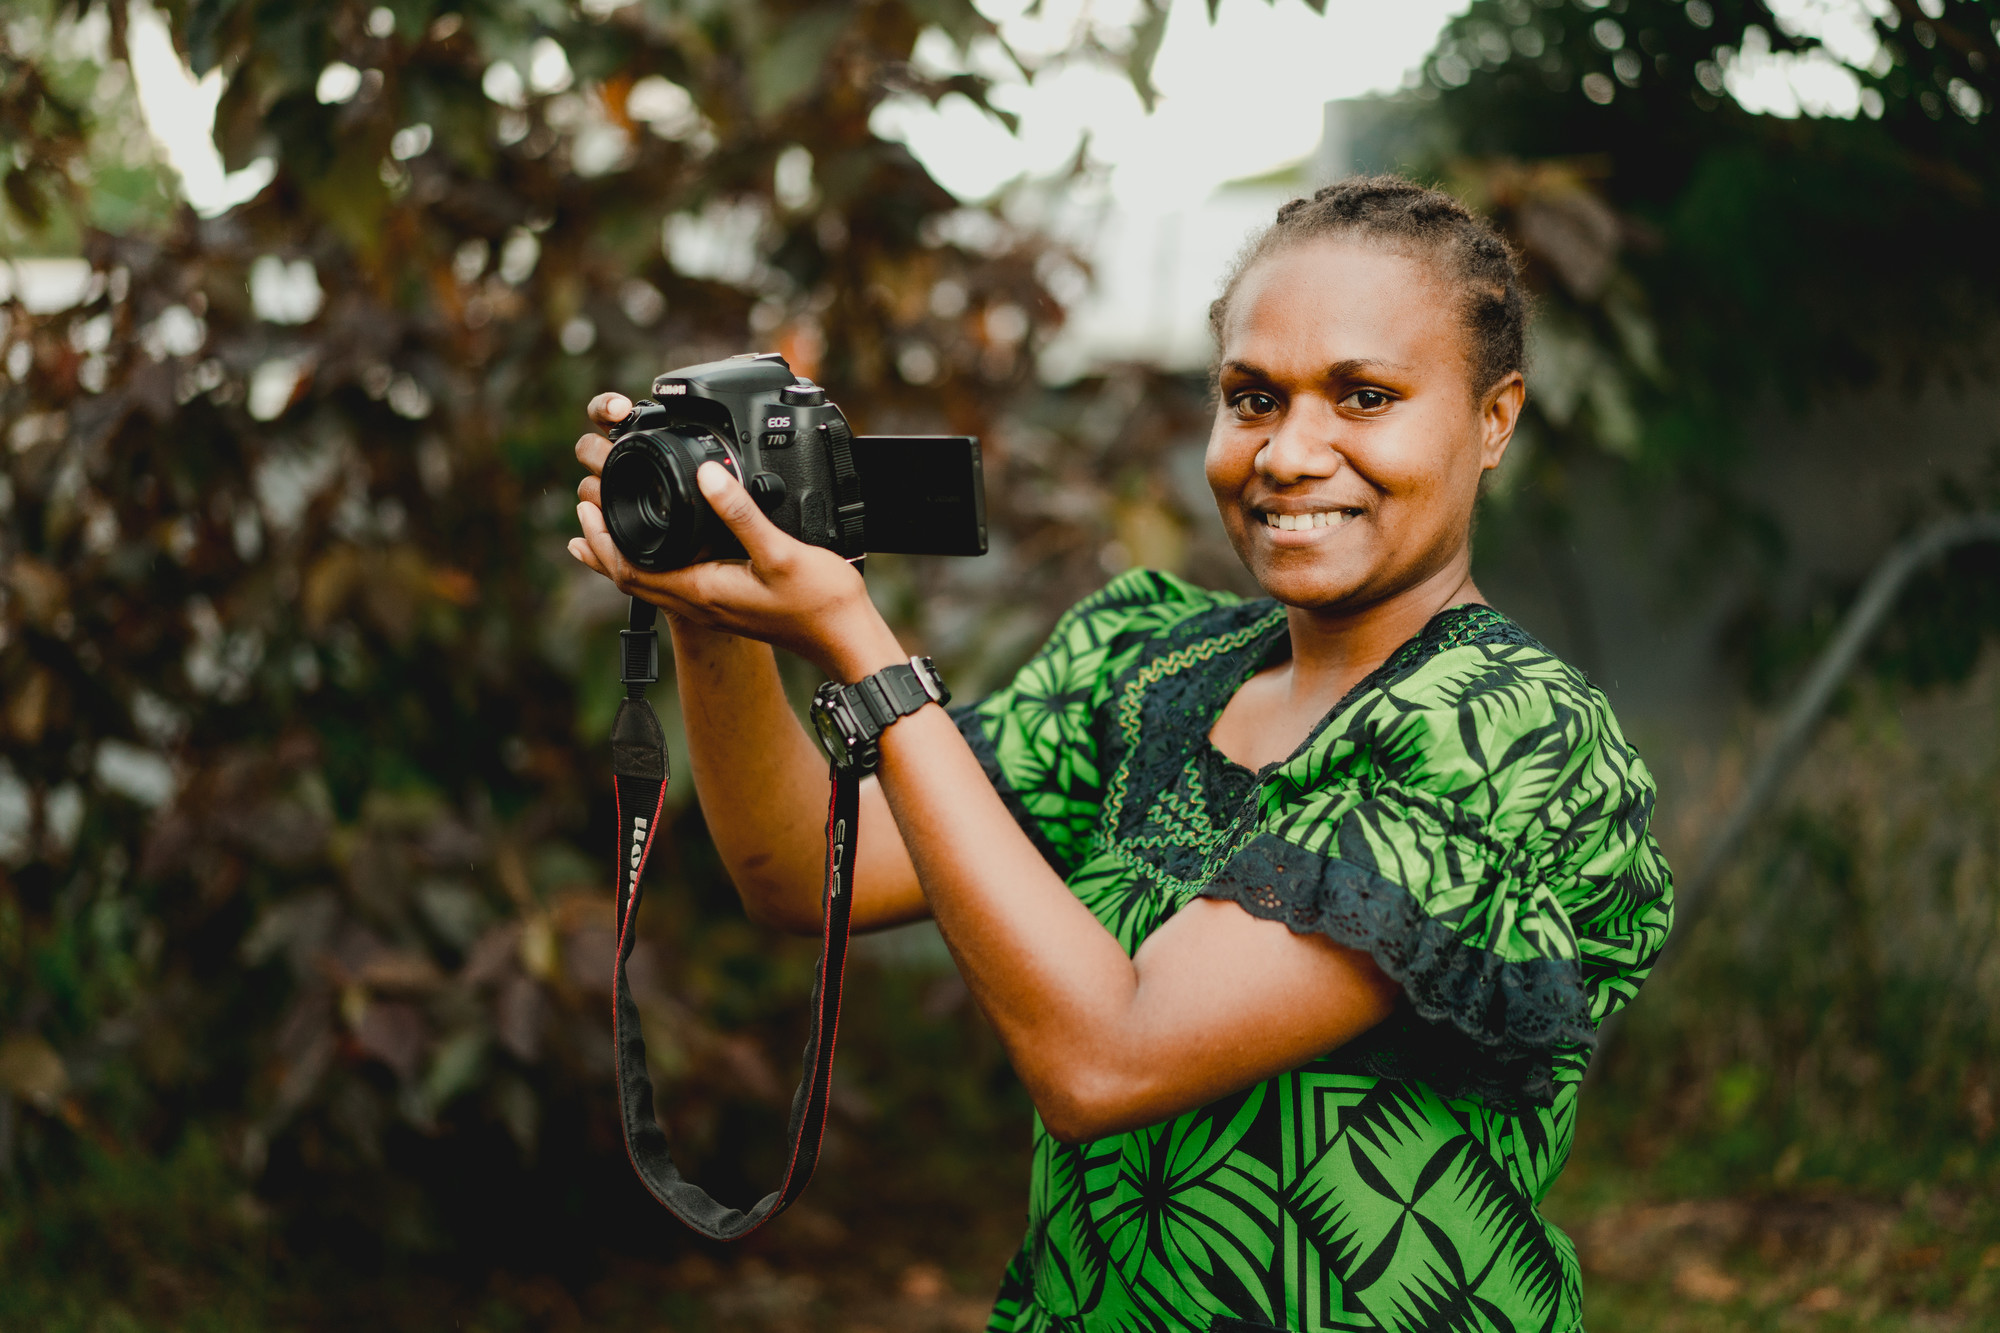 Ann-Ruth has worked with Further Arts, a Vanuatu-based charitable association furthering Vanuatu music, media, dance, and culture. She is currently running her own small business in painting and sewing. Valerie Fernandez/CARE